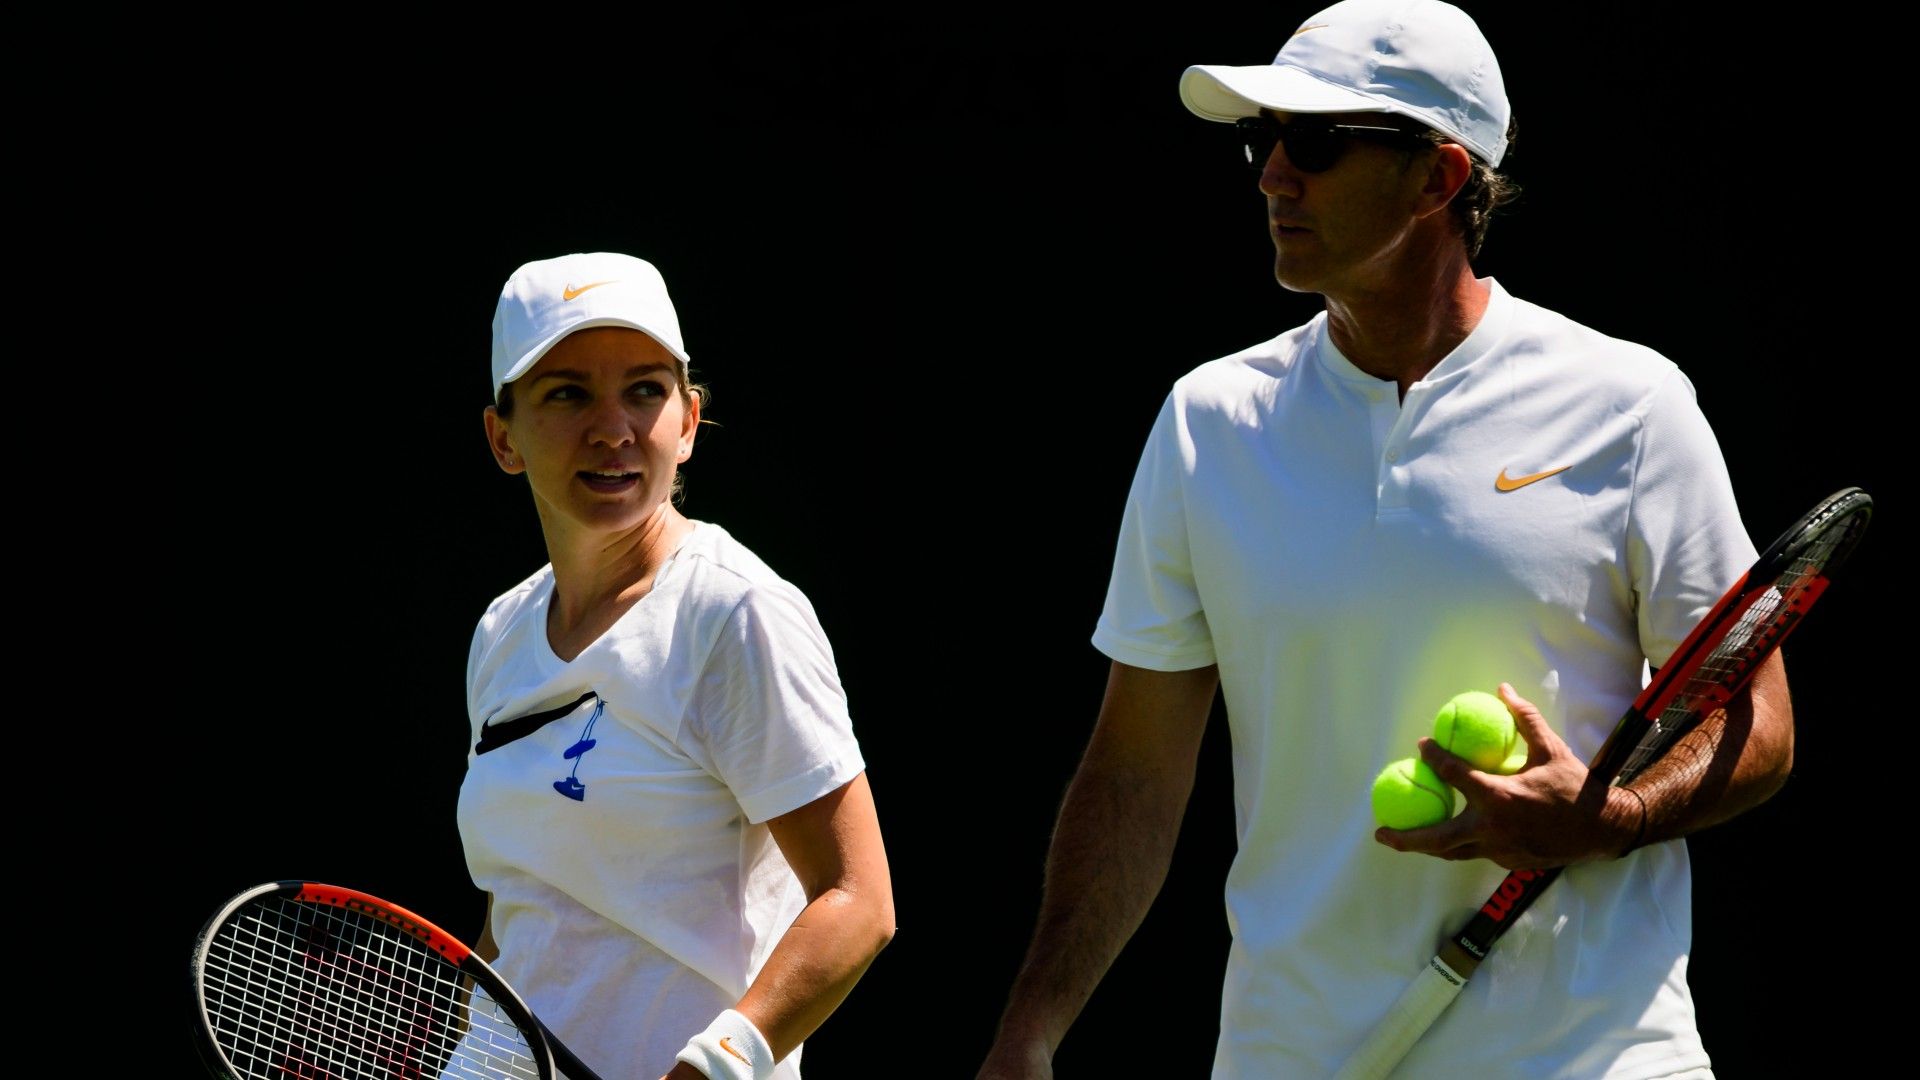 Simona Halep pays tribute to Aussie coach Darren Cahill as the long-term partnership ends